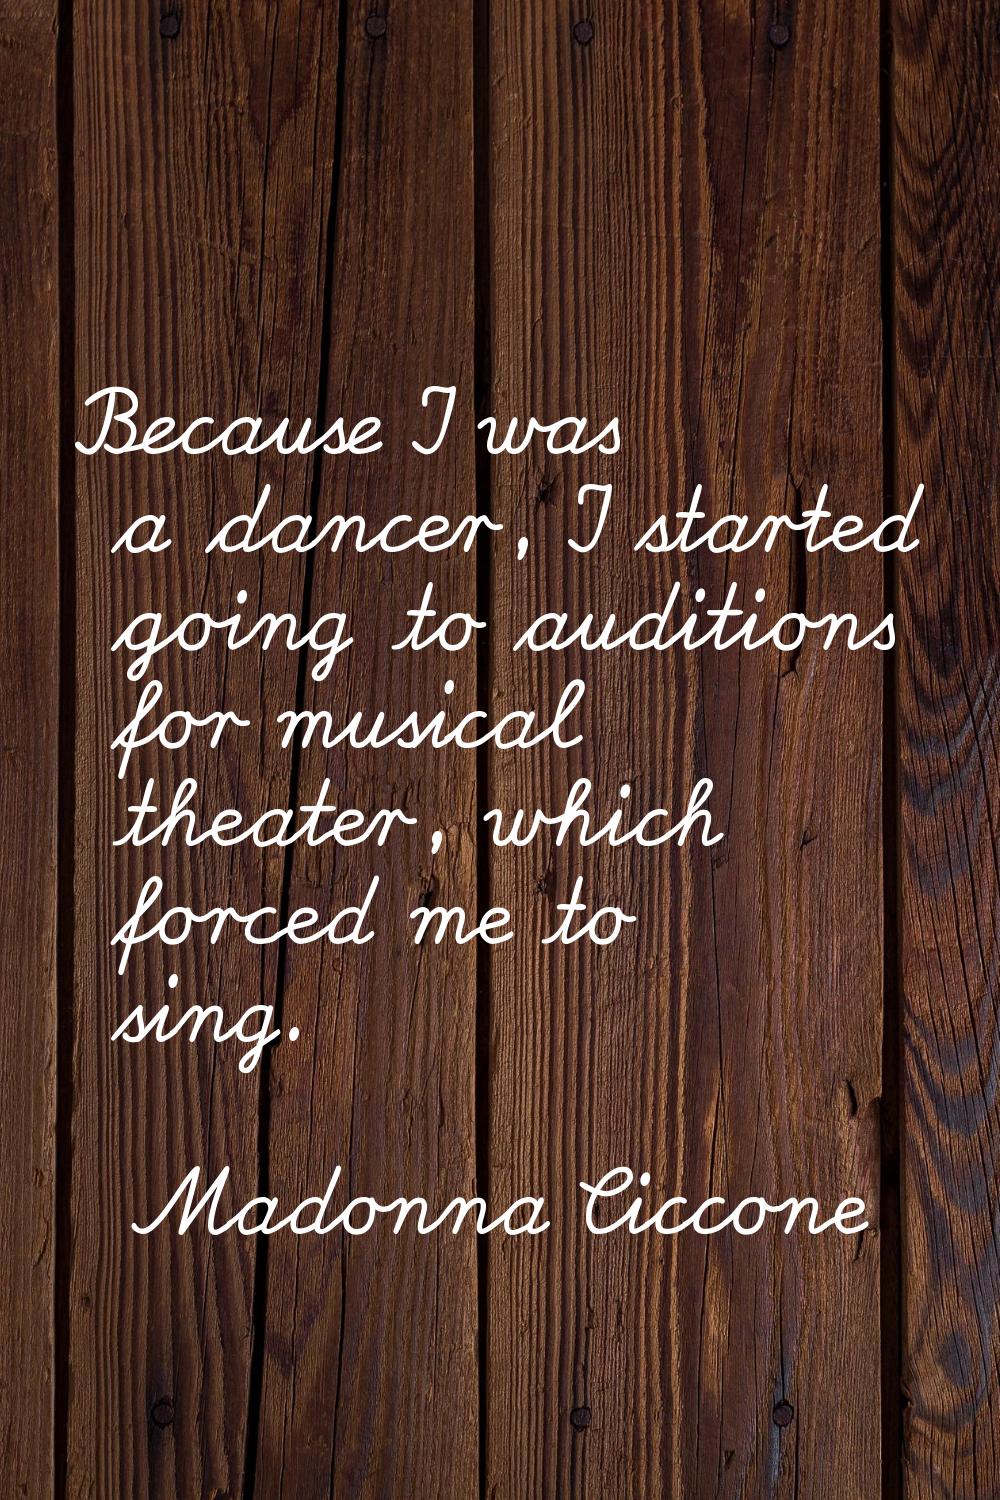 Because I was a dancer, I started going to auditions for musical theater, which forced me to sing.